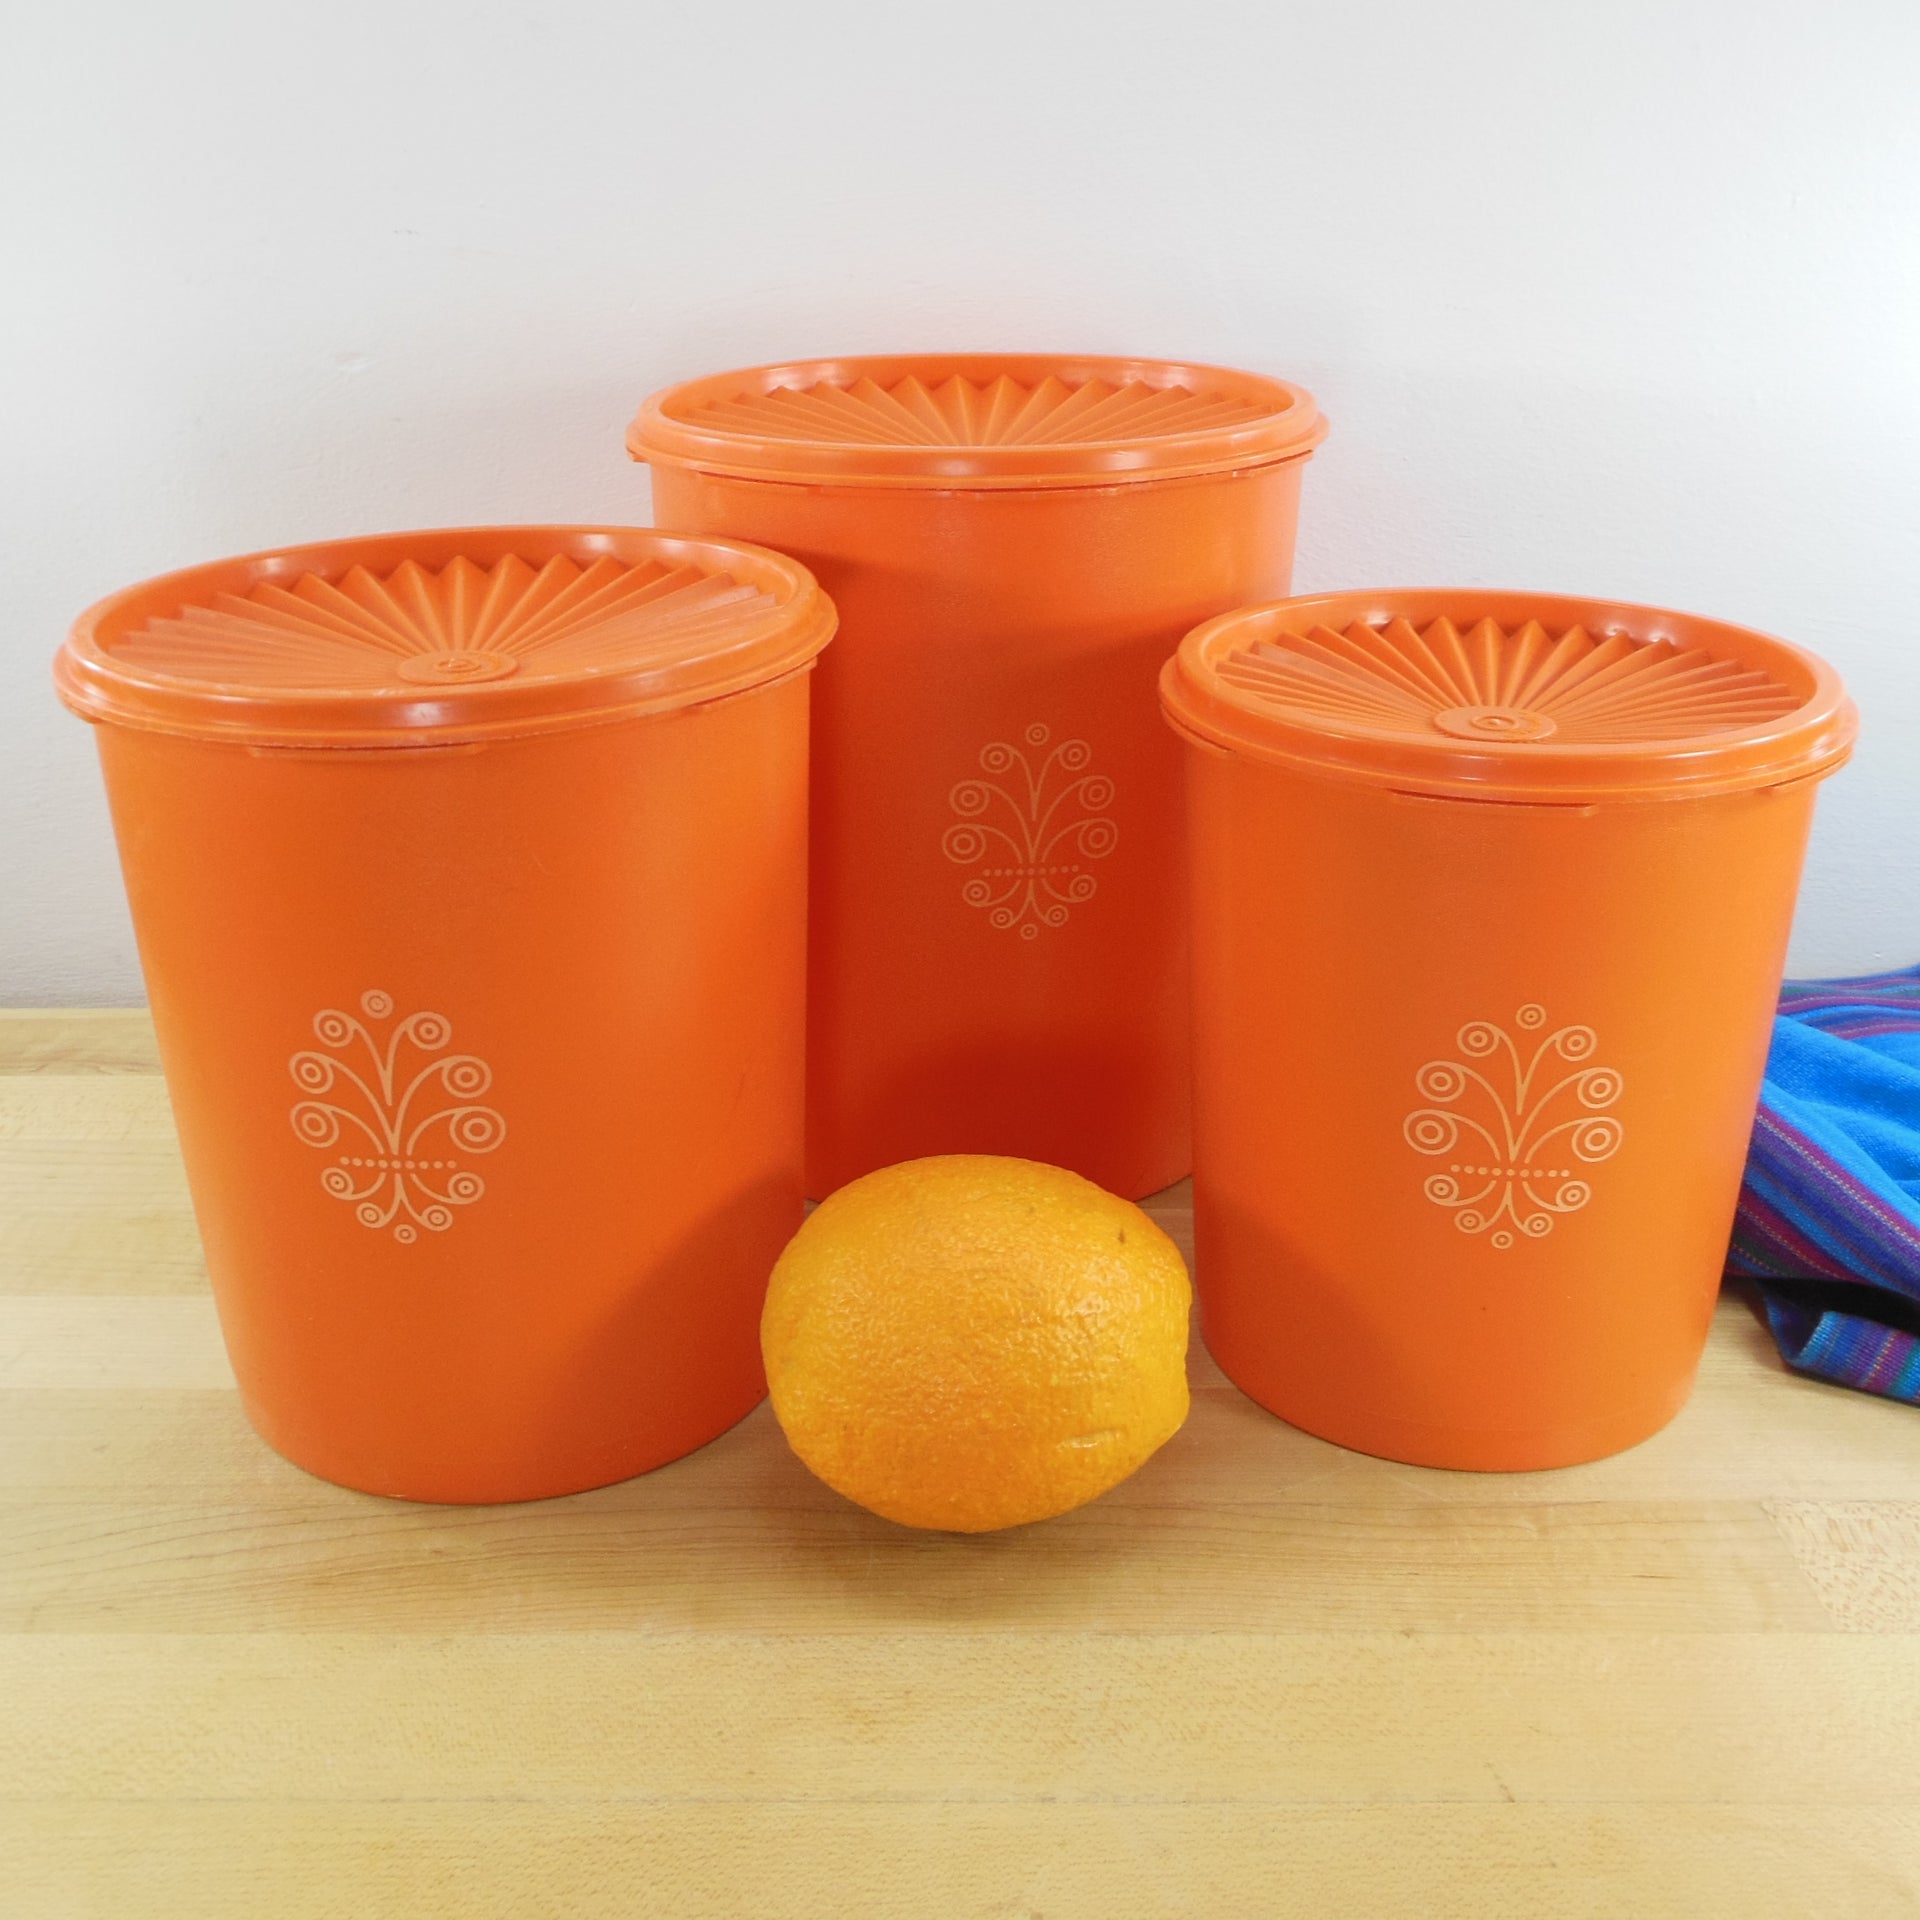 VINTAGE Tupperware Canisters / Containers (4) - Orange [One Lid Missing] &  Green